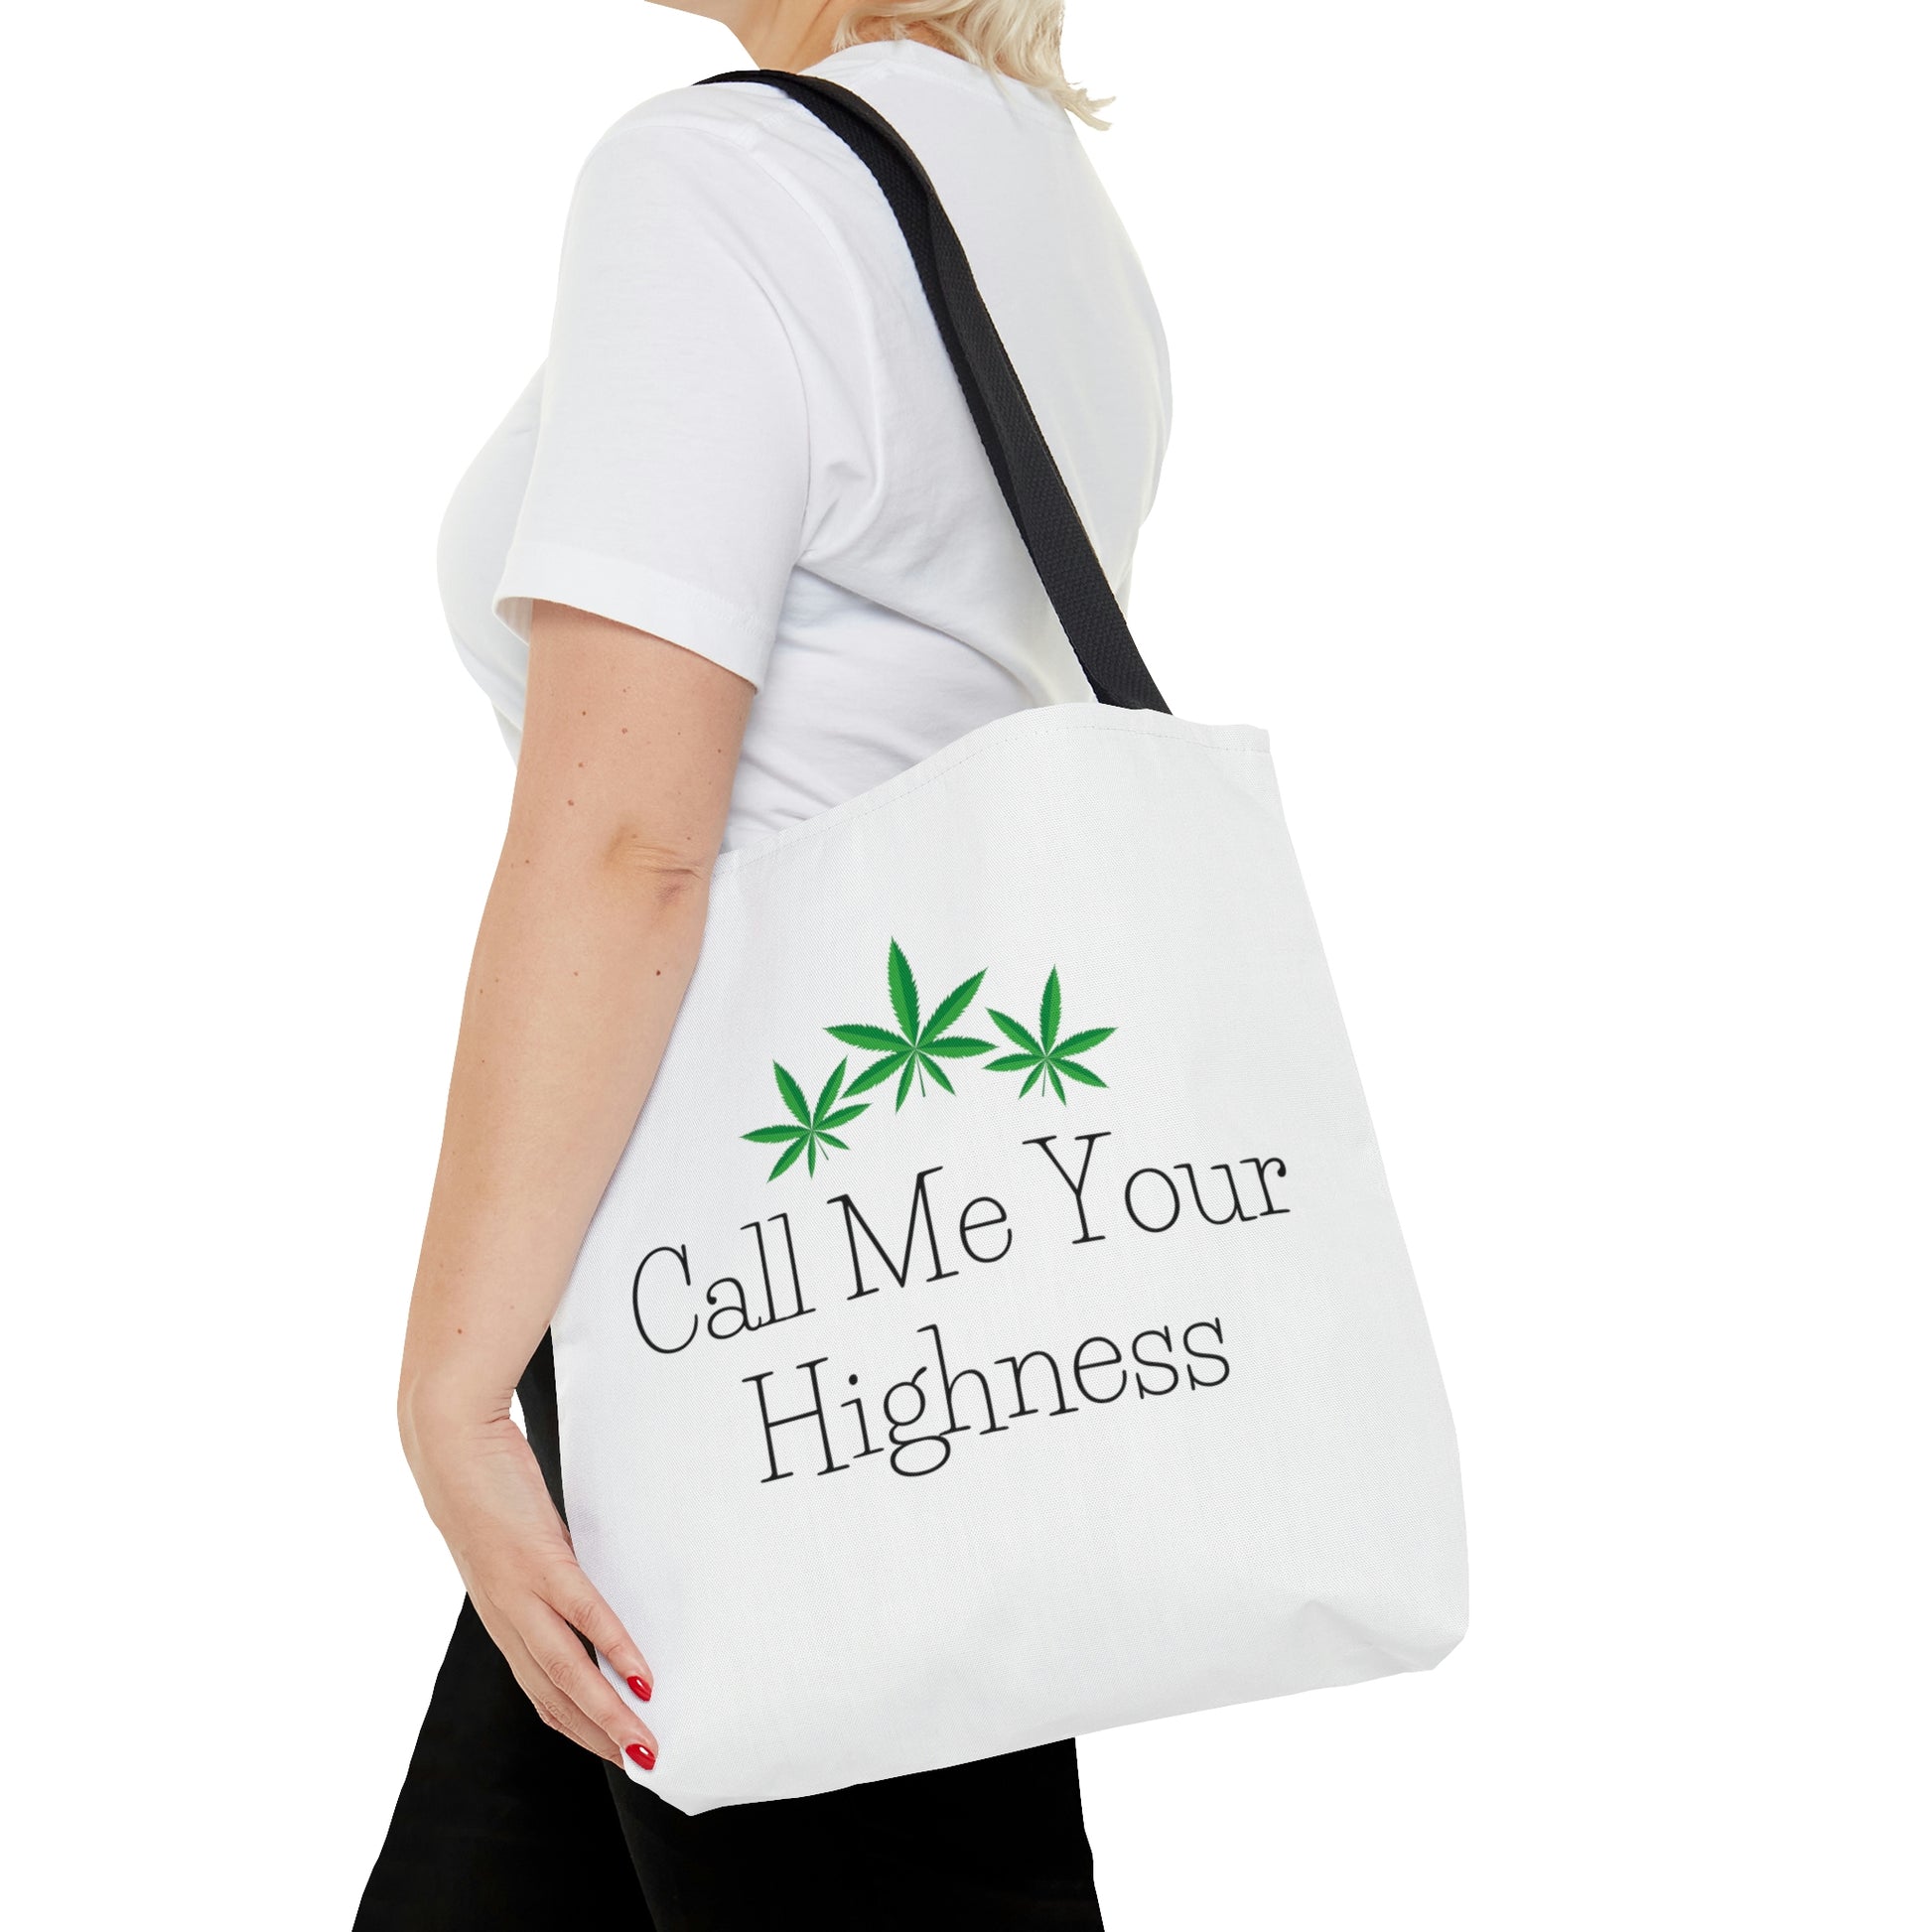 A woman in a white t shirt with black pants is carrying the Call Me Your Highness Green Leaf Tote Bag on her shoulder